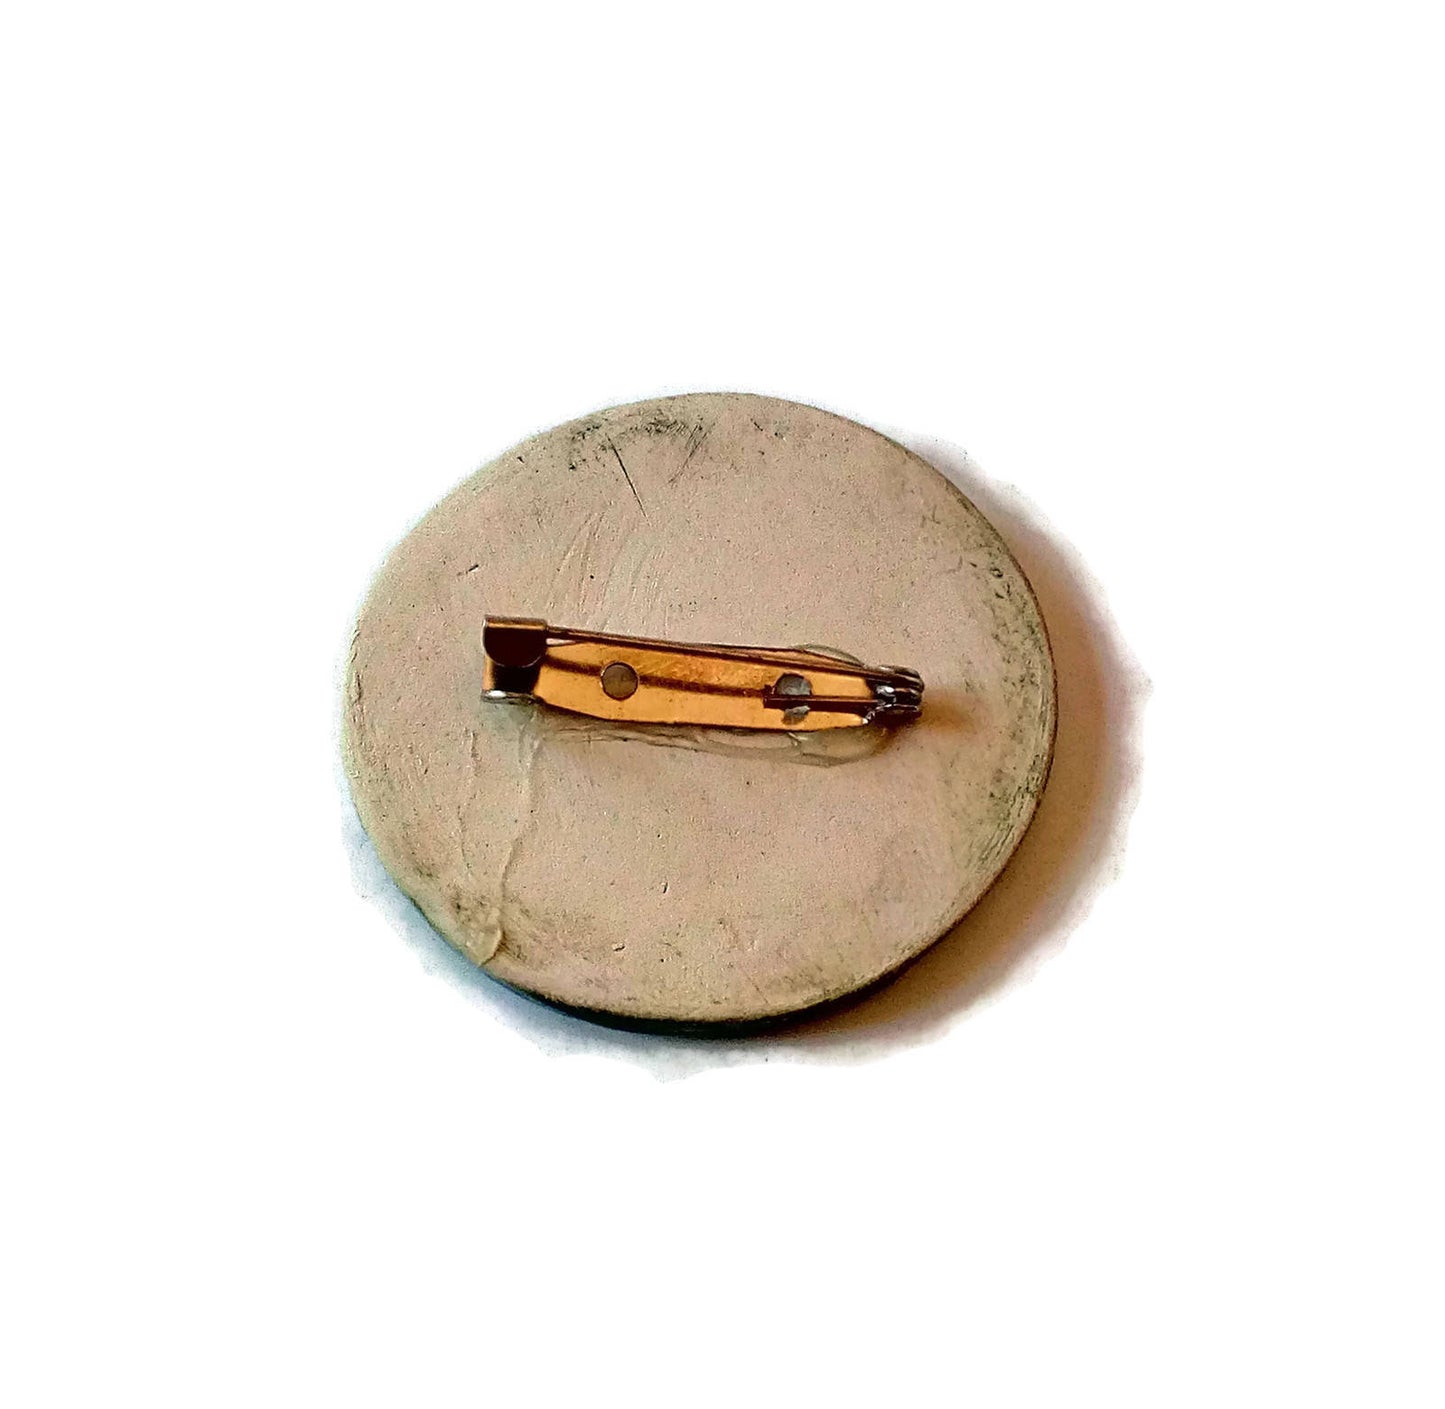 Handmade Ceramic Green Textured Brooch For Women, Round Shaped Clothing Brooch For Her, Lapel Pin Gift For Him, 9th Anniversary Gift Idea - Ceramica Ana Rafael